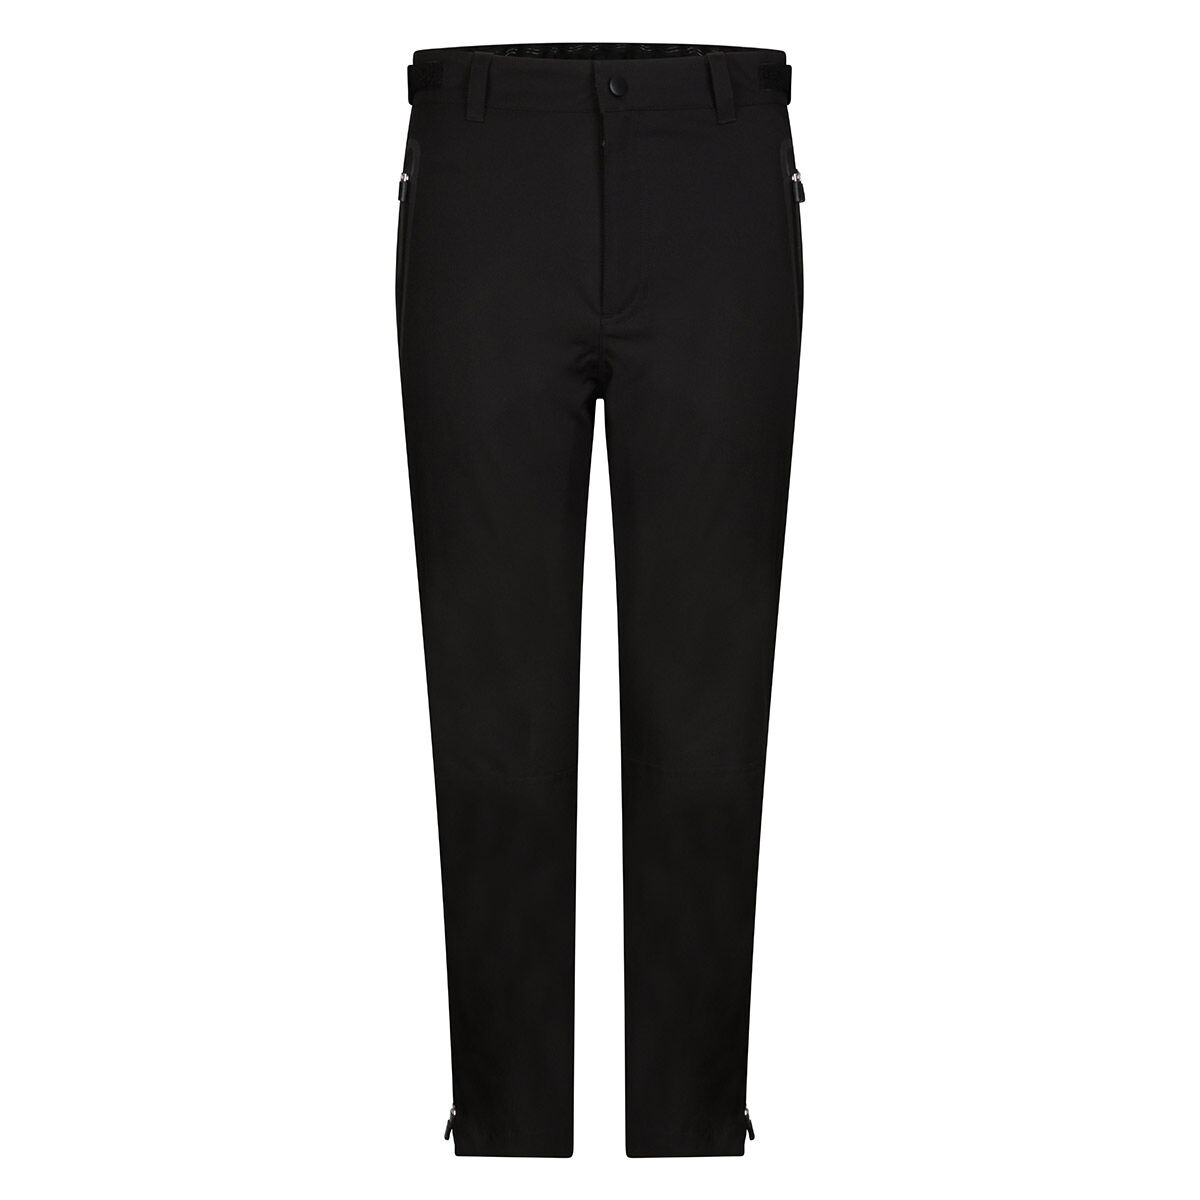 Galvin Green Alana GORE-TEX Ladies Waterproof Trousers From Discount Golf  Store